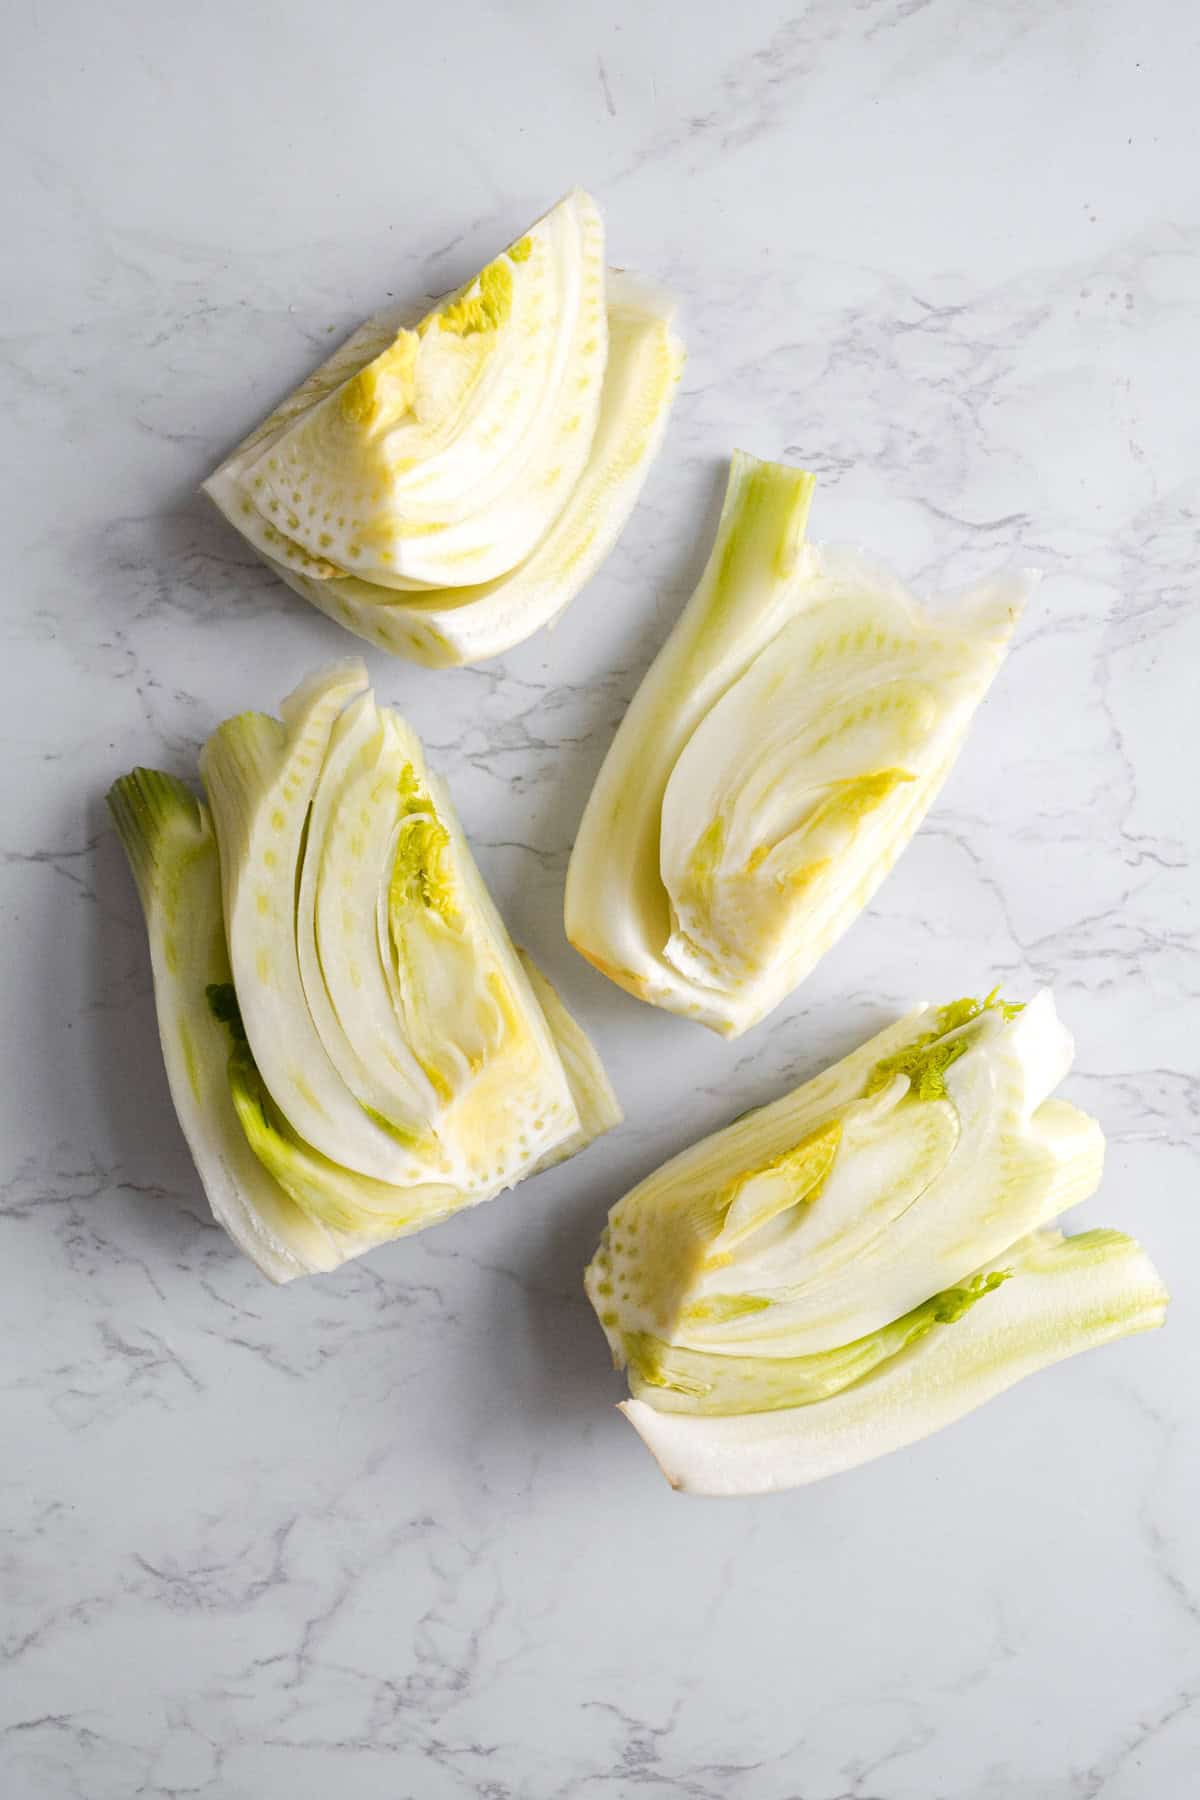 Quartered and cored fennel bulb on a marble surface.